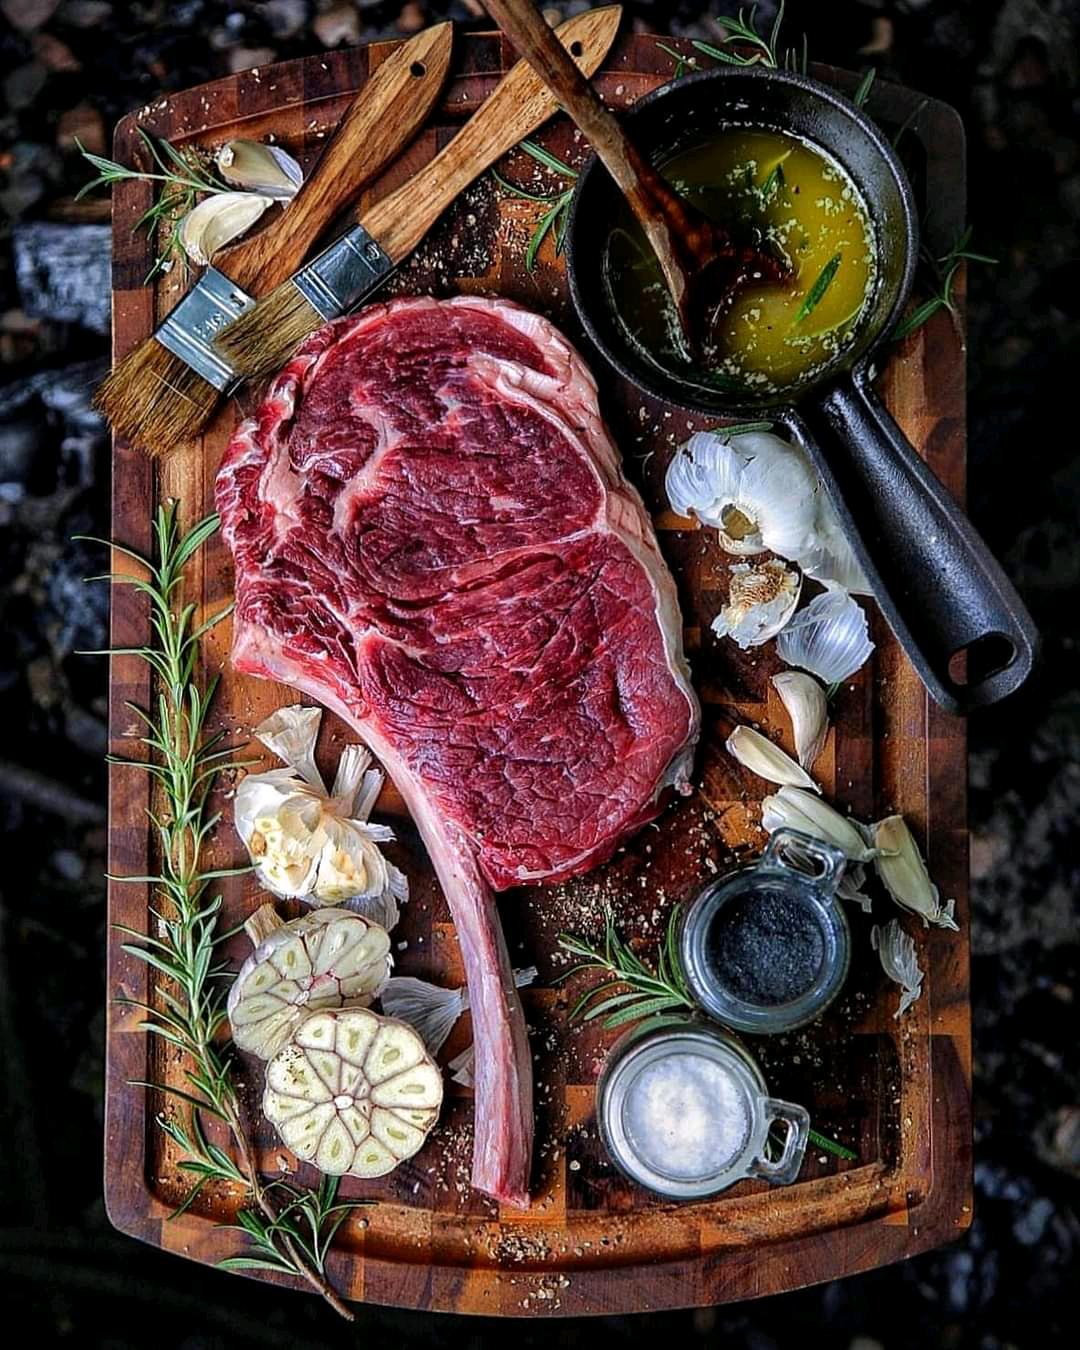 Things don't need to be more complicated than beef, butter, rosemary, spg, and charcoal!! So dang epic!!!

1 36oz Certified Piedmontese Tomahawk Steak